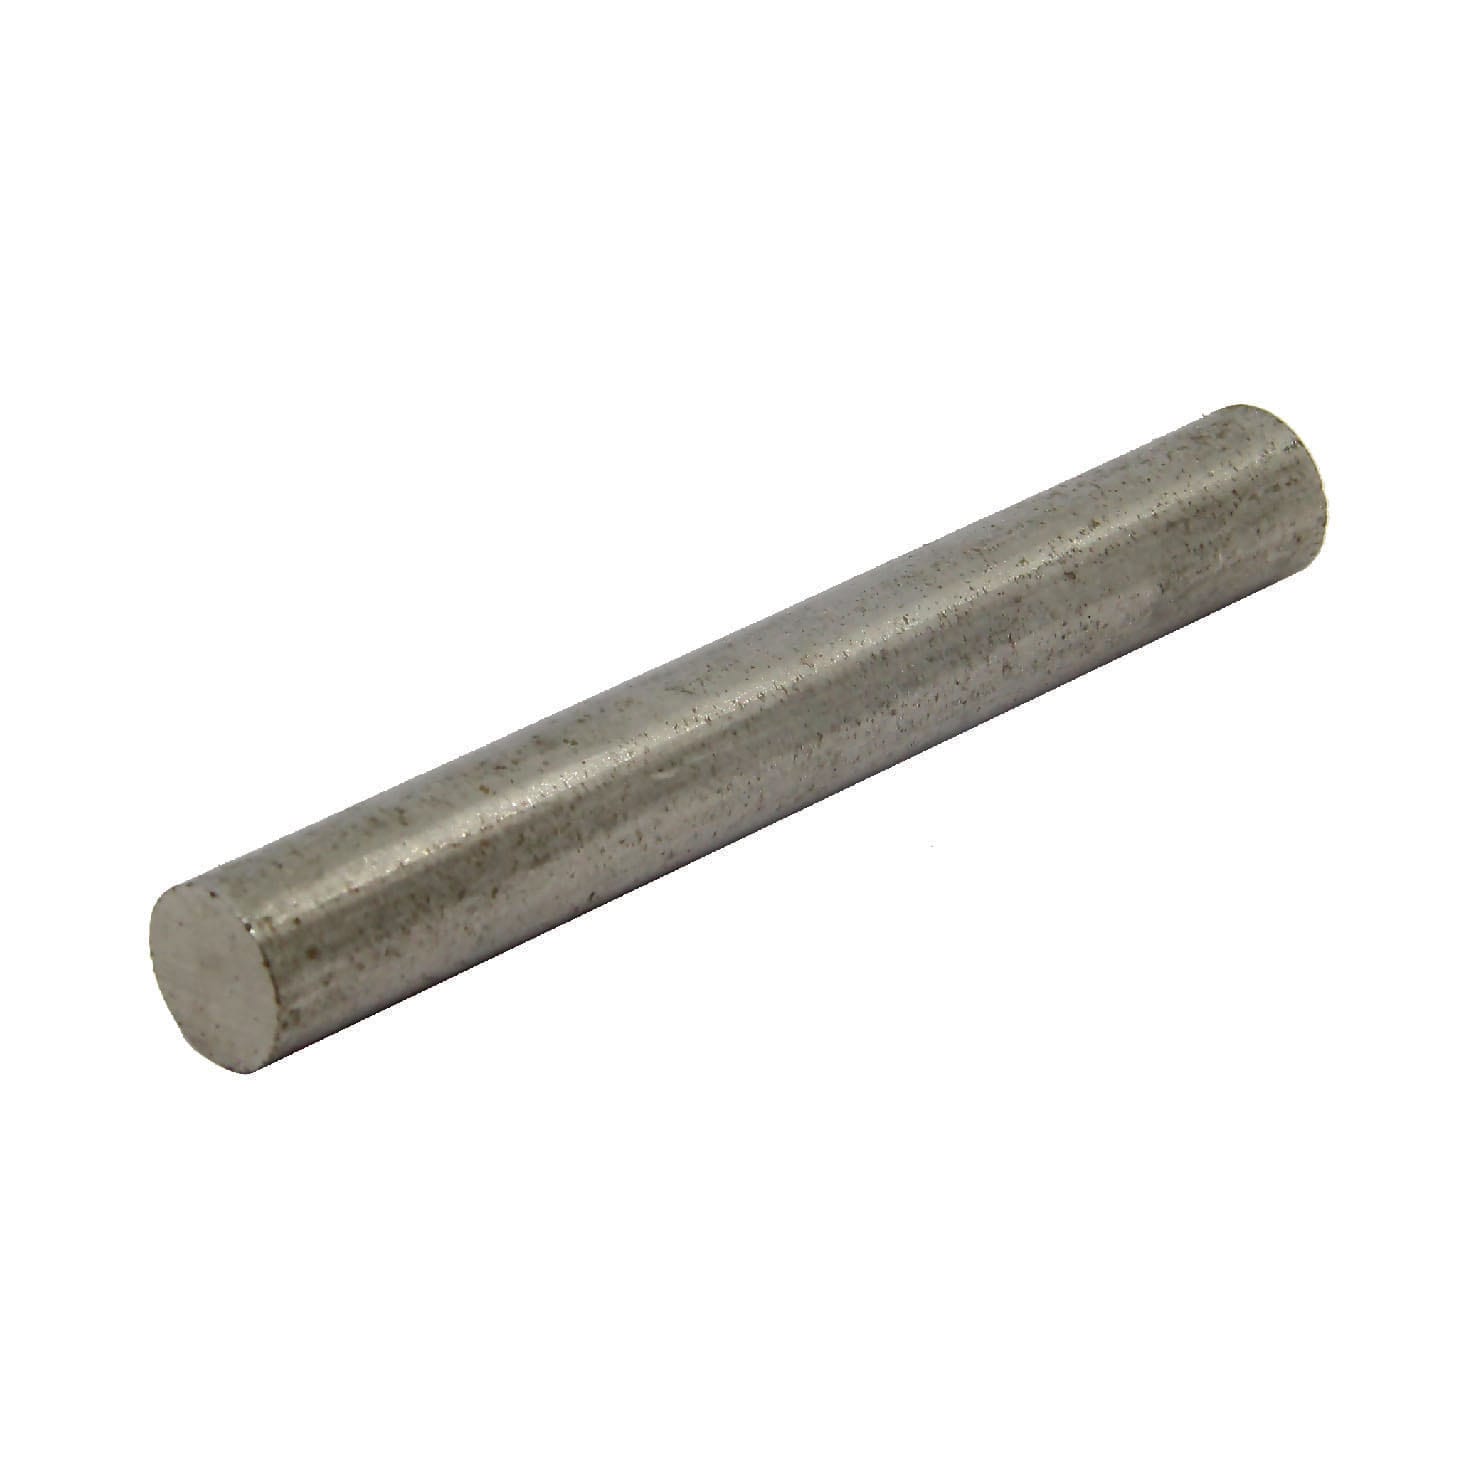 10mm x 75mm Alnico Rod | Magnets NZ | Local Supplier